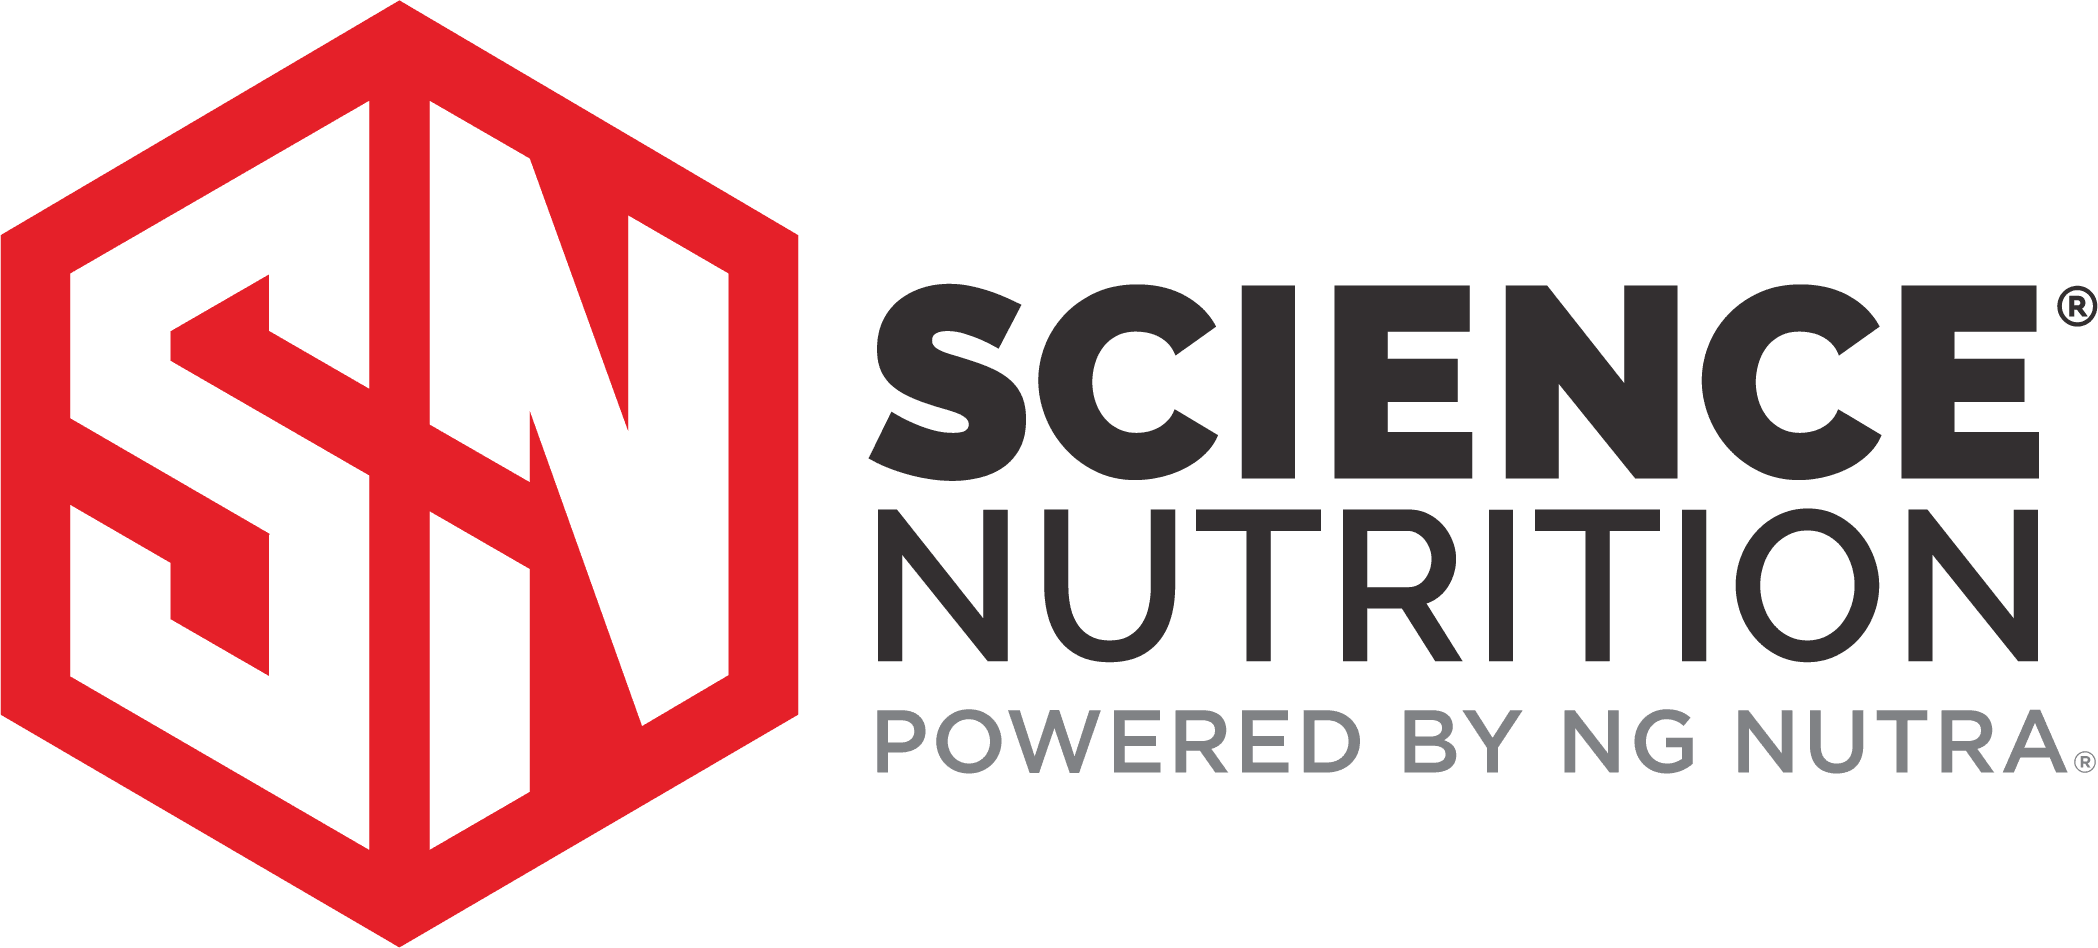 Science Nutrition Powered By NG Nutrition